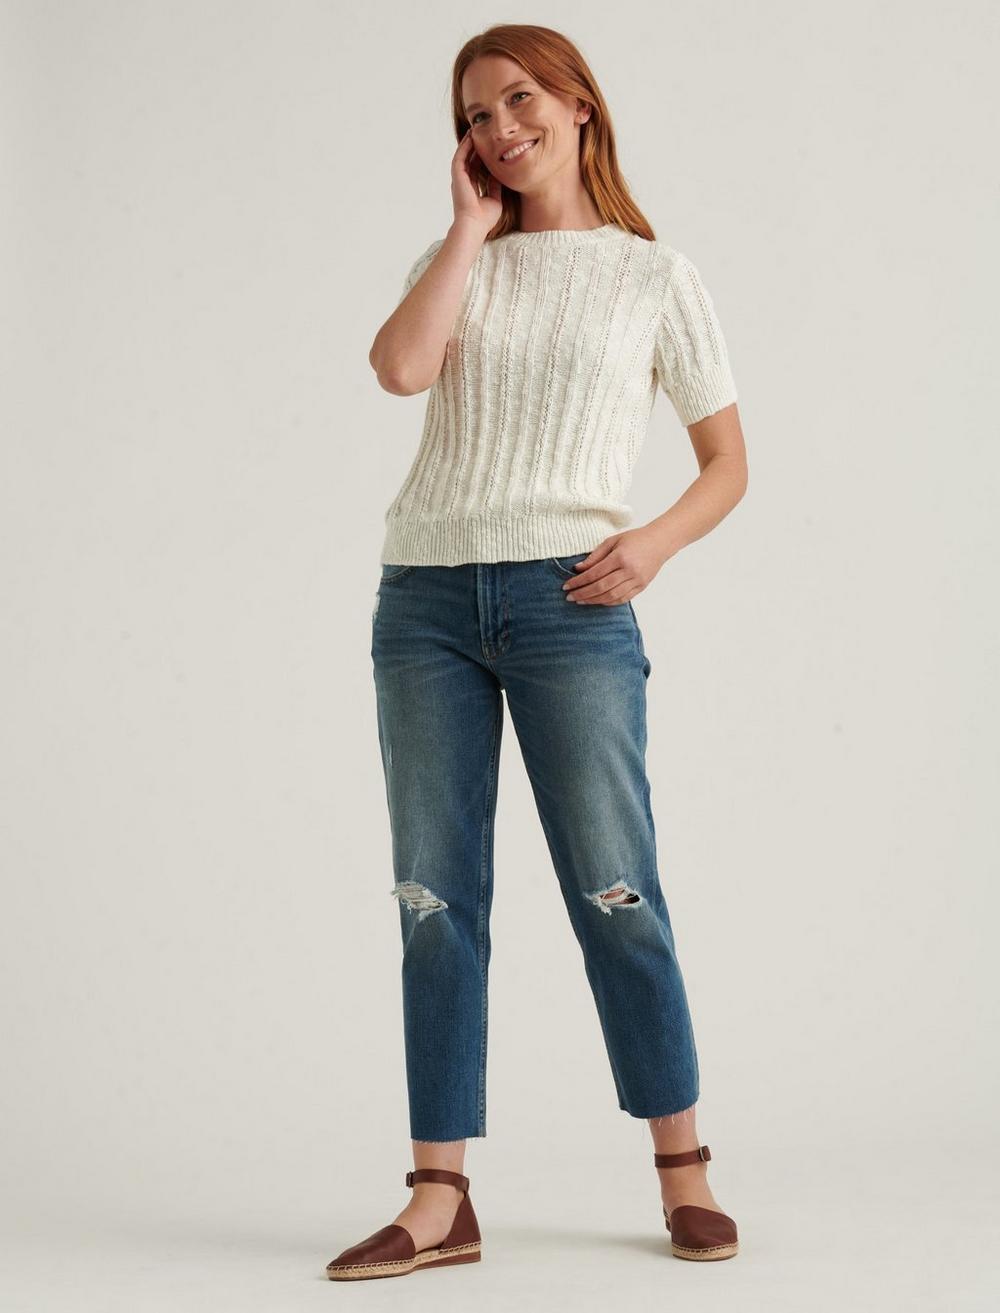 LIGHTWEIGHT SHORT SLEEVE CABLE SWEATER, image 2